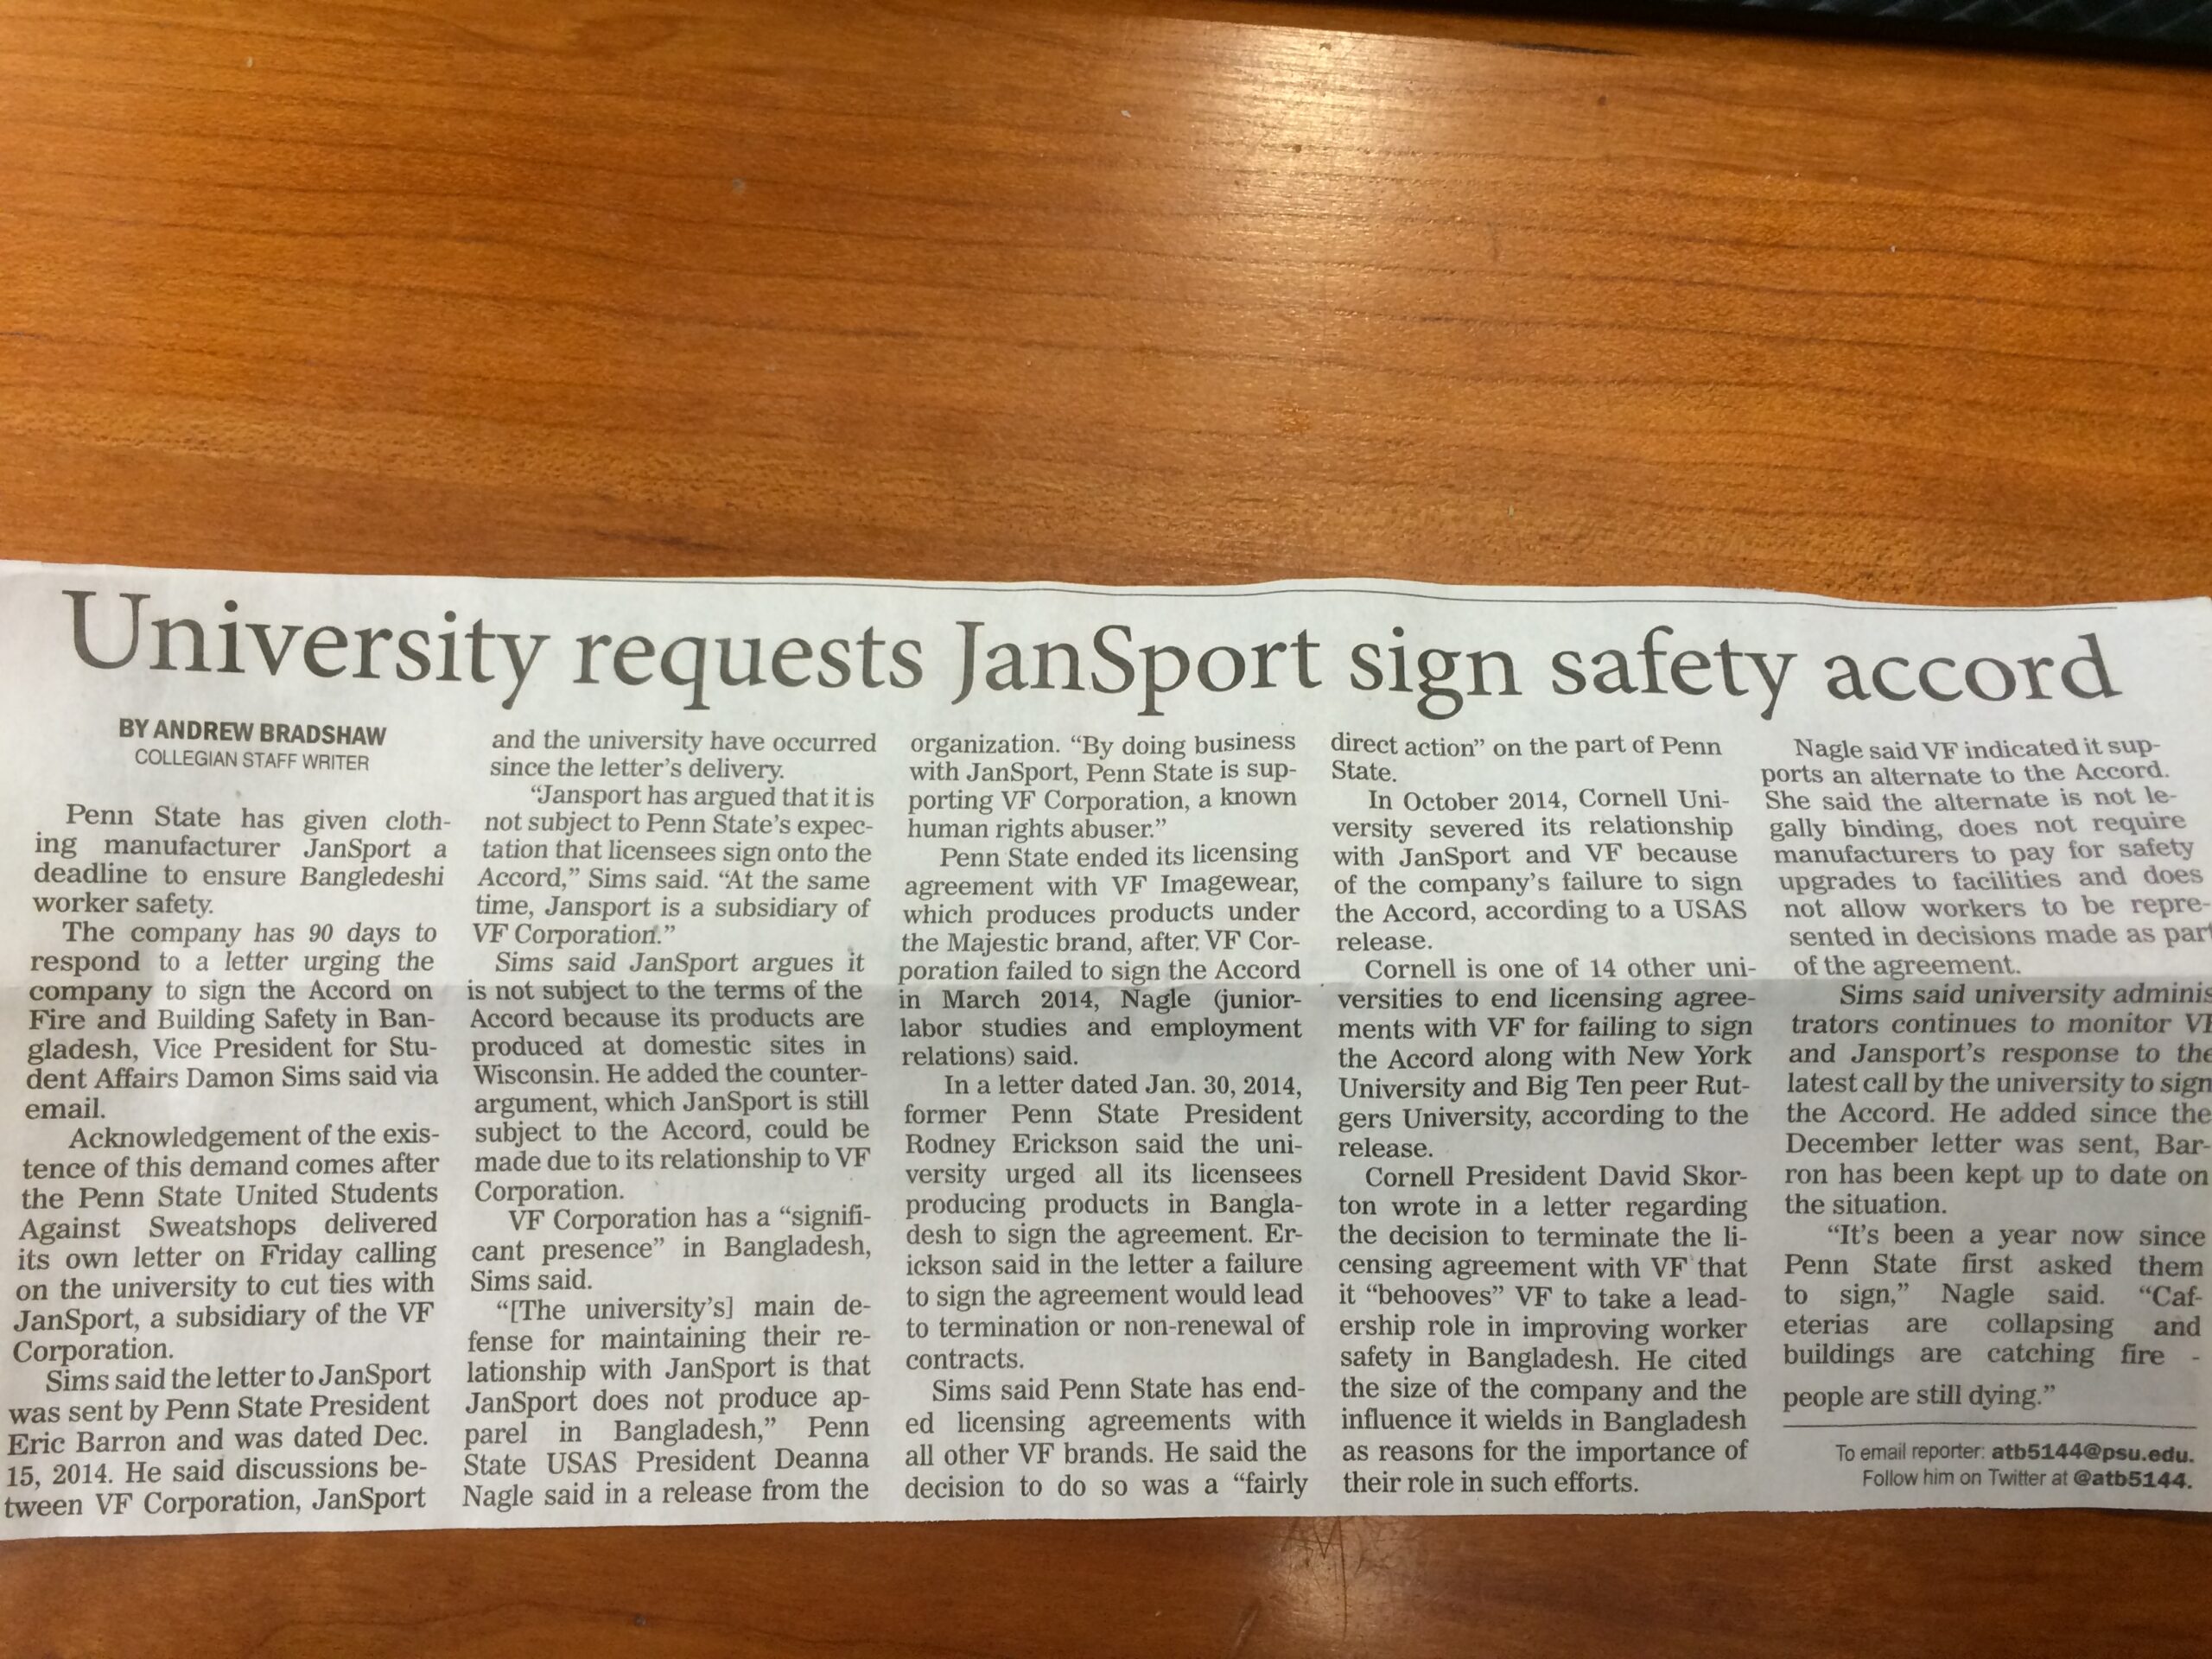 Penn State gives JanSport 90 days to sign Bangladesh safety accord